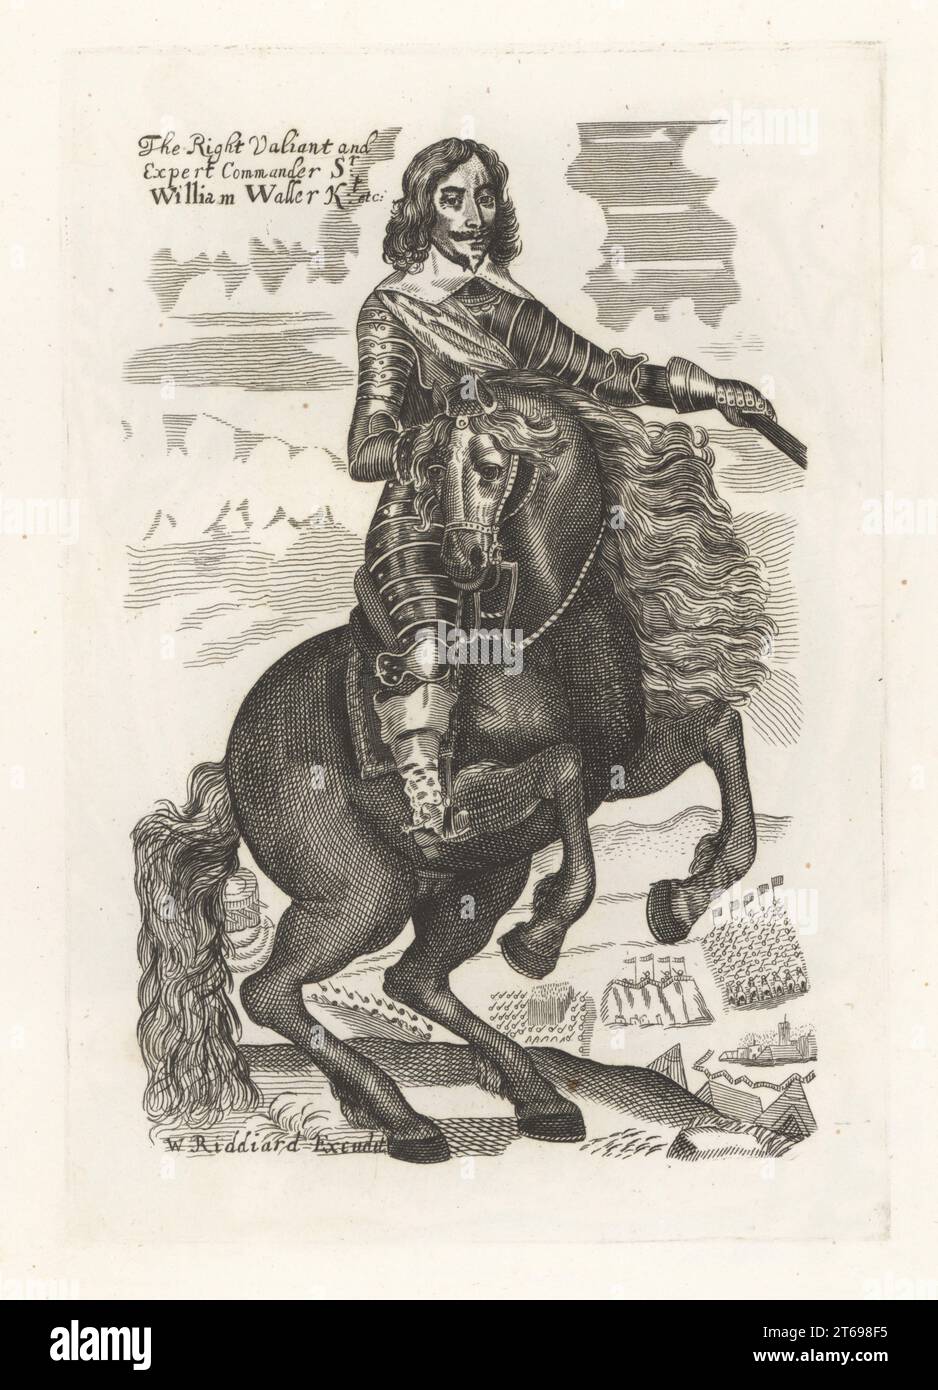 Sir William Waller, English soldier, c. 1597-1668. Commander of Parliamentarian armies during the First English Civil War. On horseback in plate armour, sash, collar and boots with spurs. Vignette of miltary camps and battles. The right valiant and expert commander. Published by William Riddiard, from the unique equestrian print in Earl Spenser's Clarendon. Copperplate engraving from Samuel Woodburns Gallery of Rare Portraits Consisting of Original Plates, George Jones, 102 St Martins Lane, London, 1816. Stock Photo